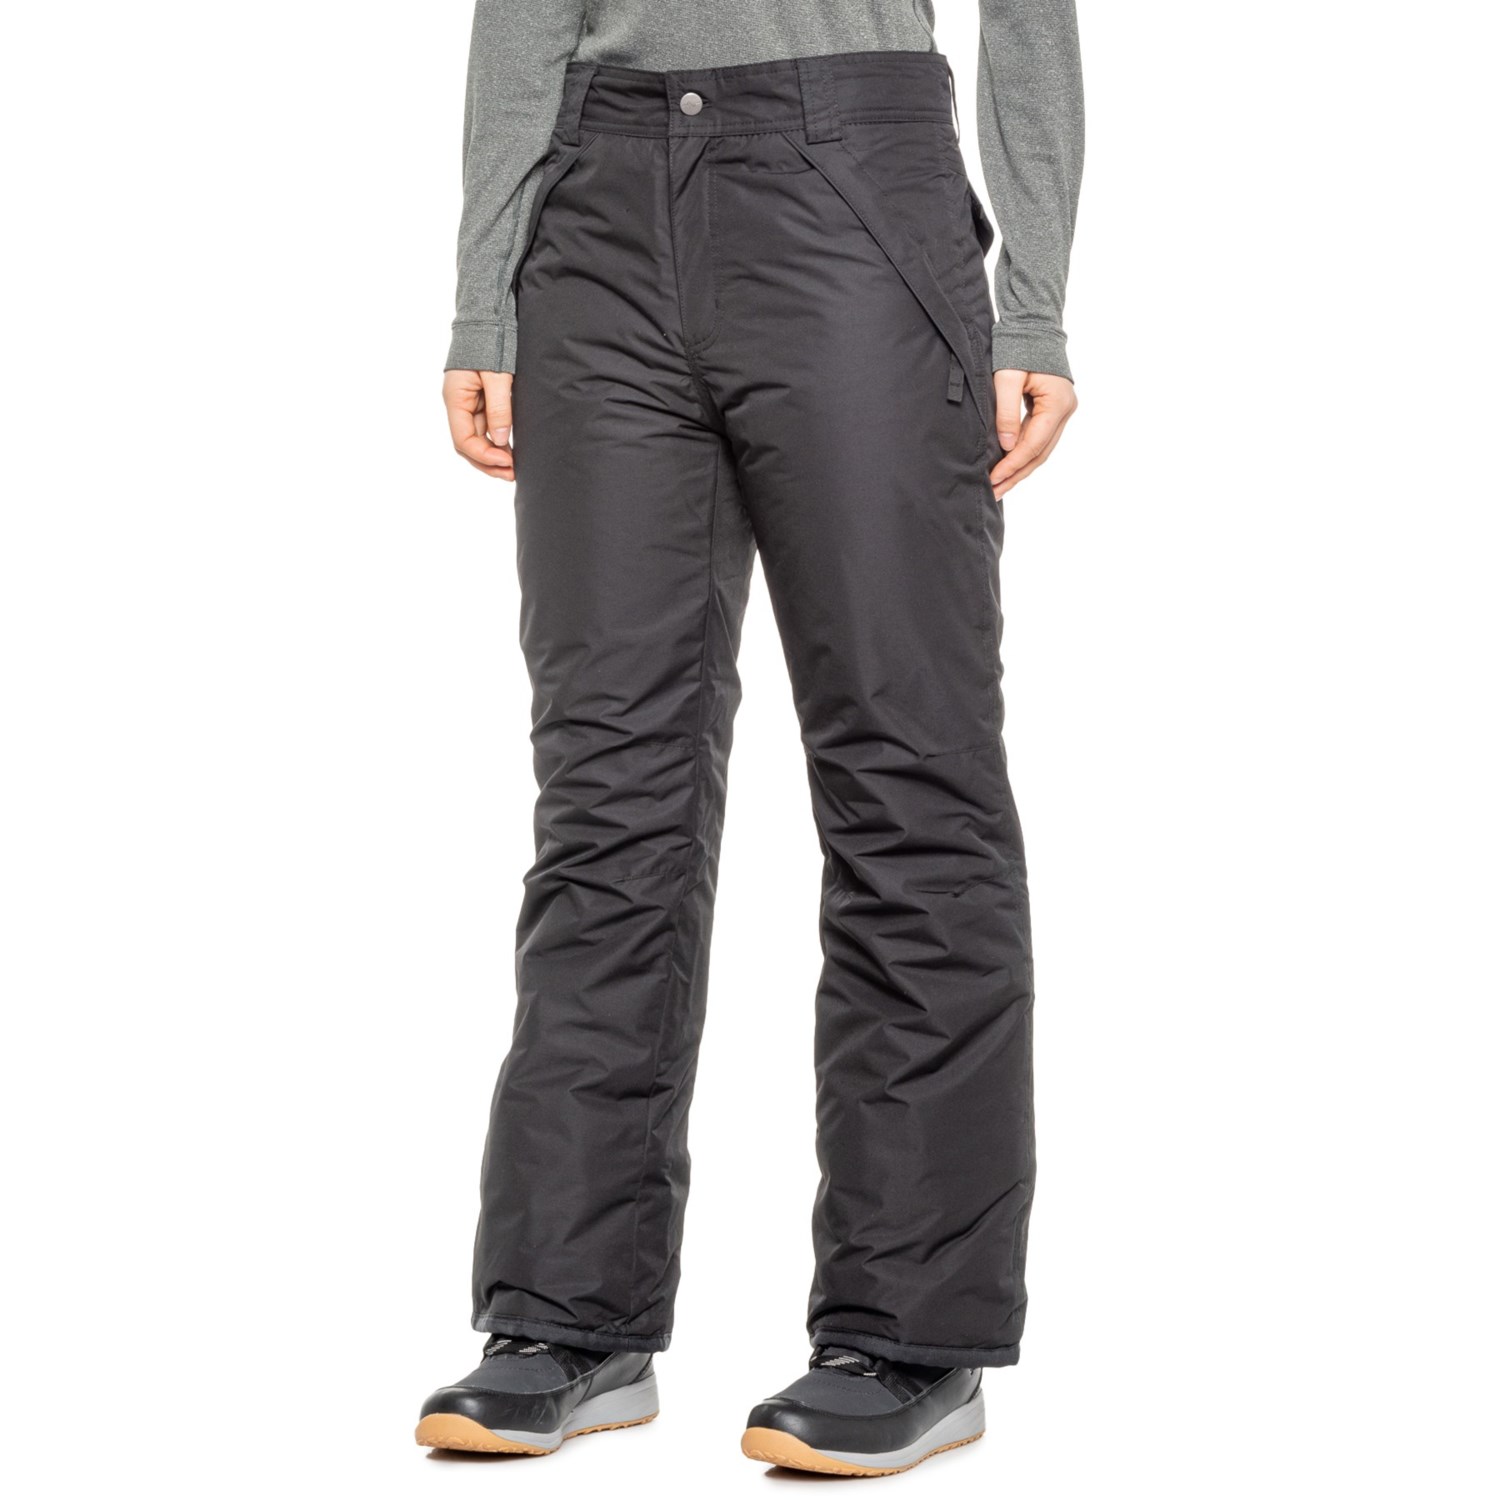 Pulse Classic Fit Snow Pants - Waterproof, Insulated, Pull-On - Save 41%